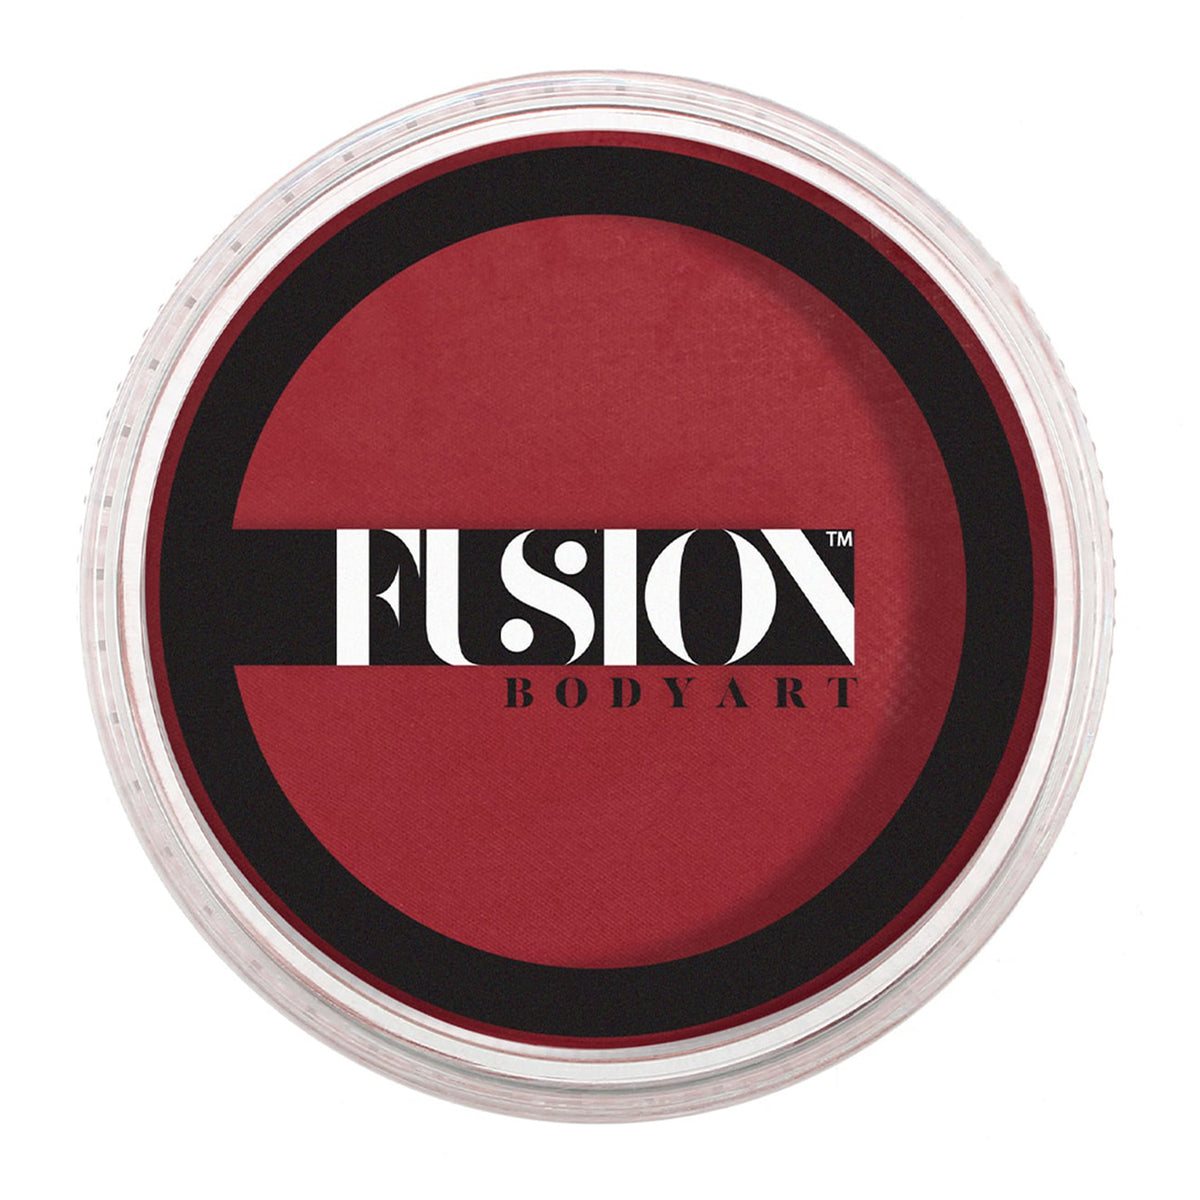 Fusion Body Art Face Paint - Prime Sweet Cherry Red